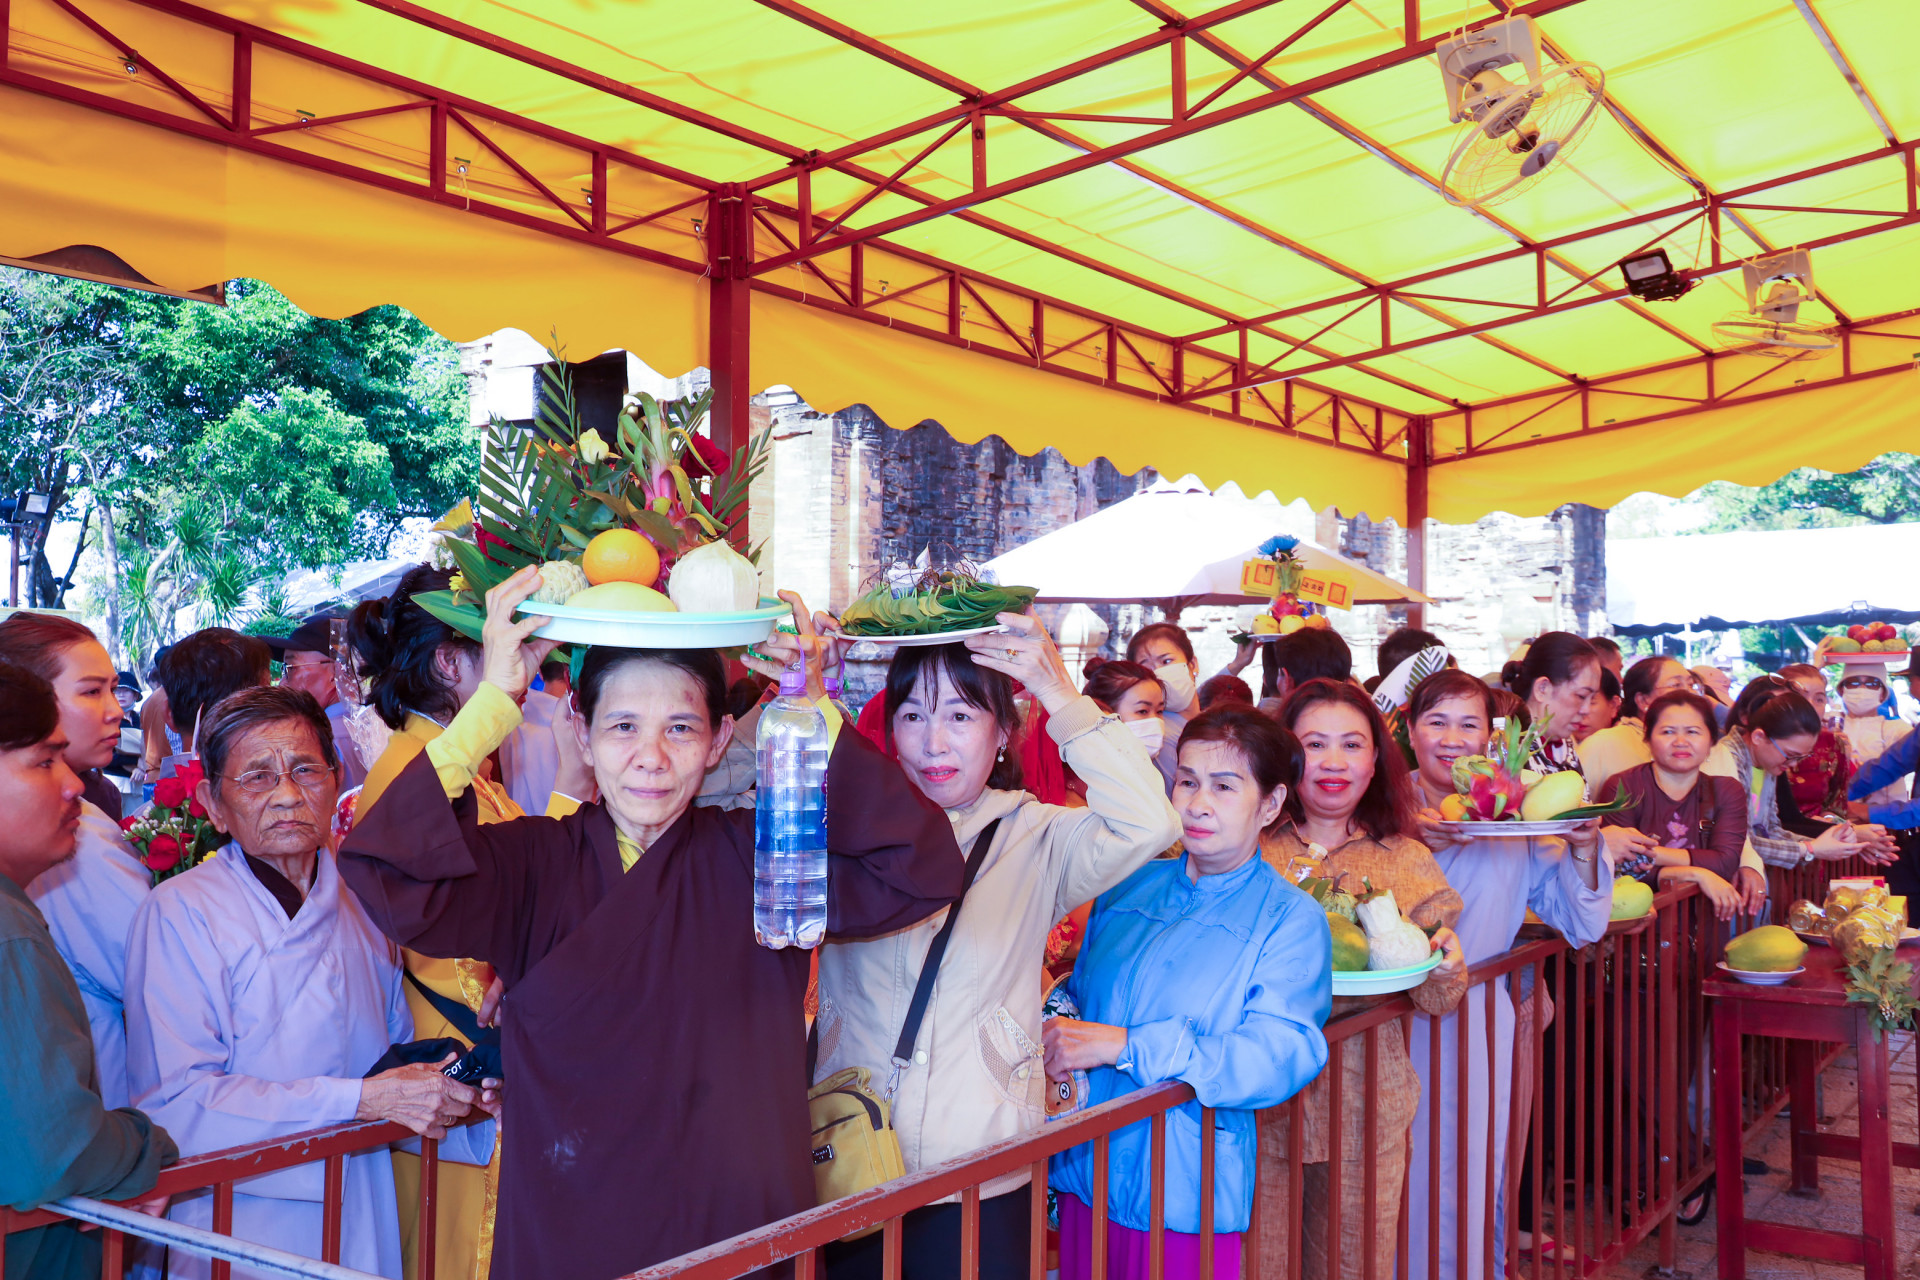 People with offerings waiting to express their gratitude to Holy Mother Thien Y A Na 

